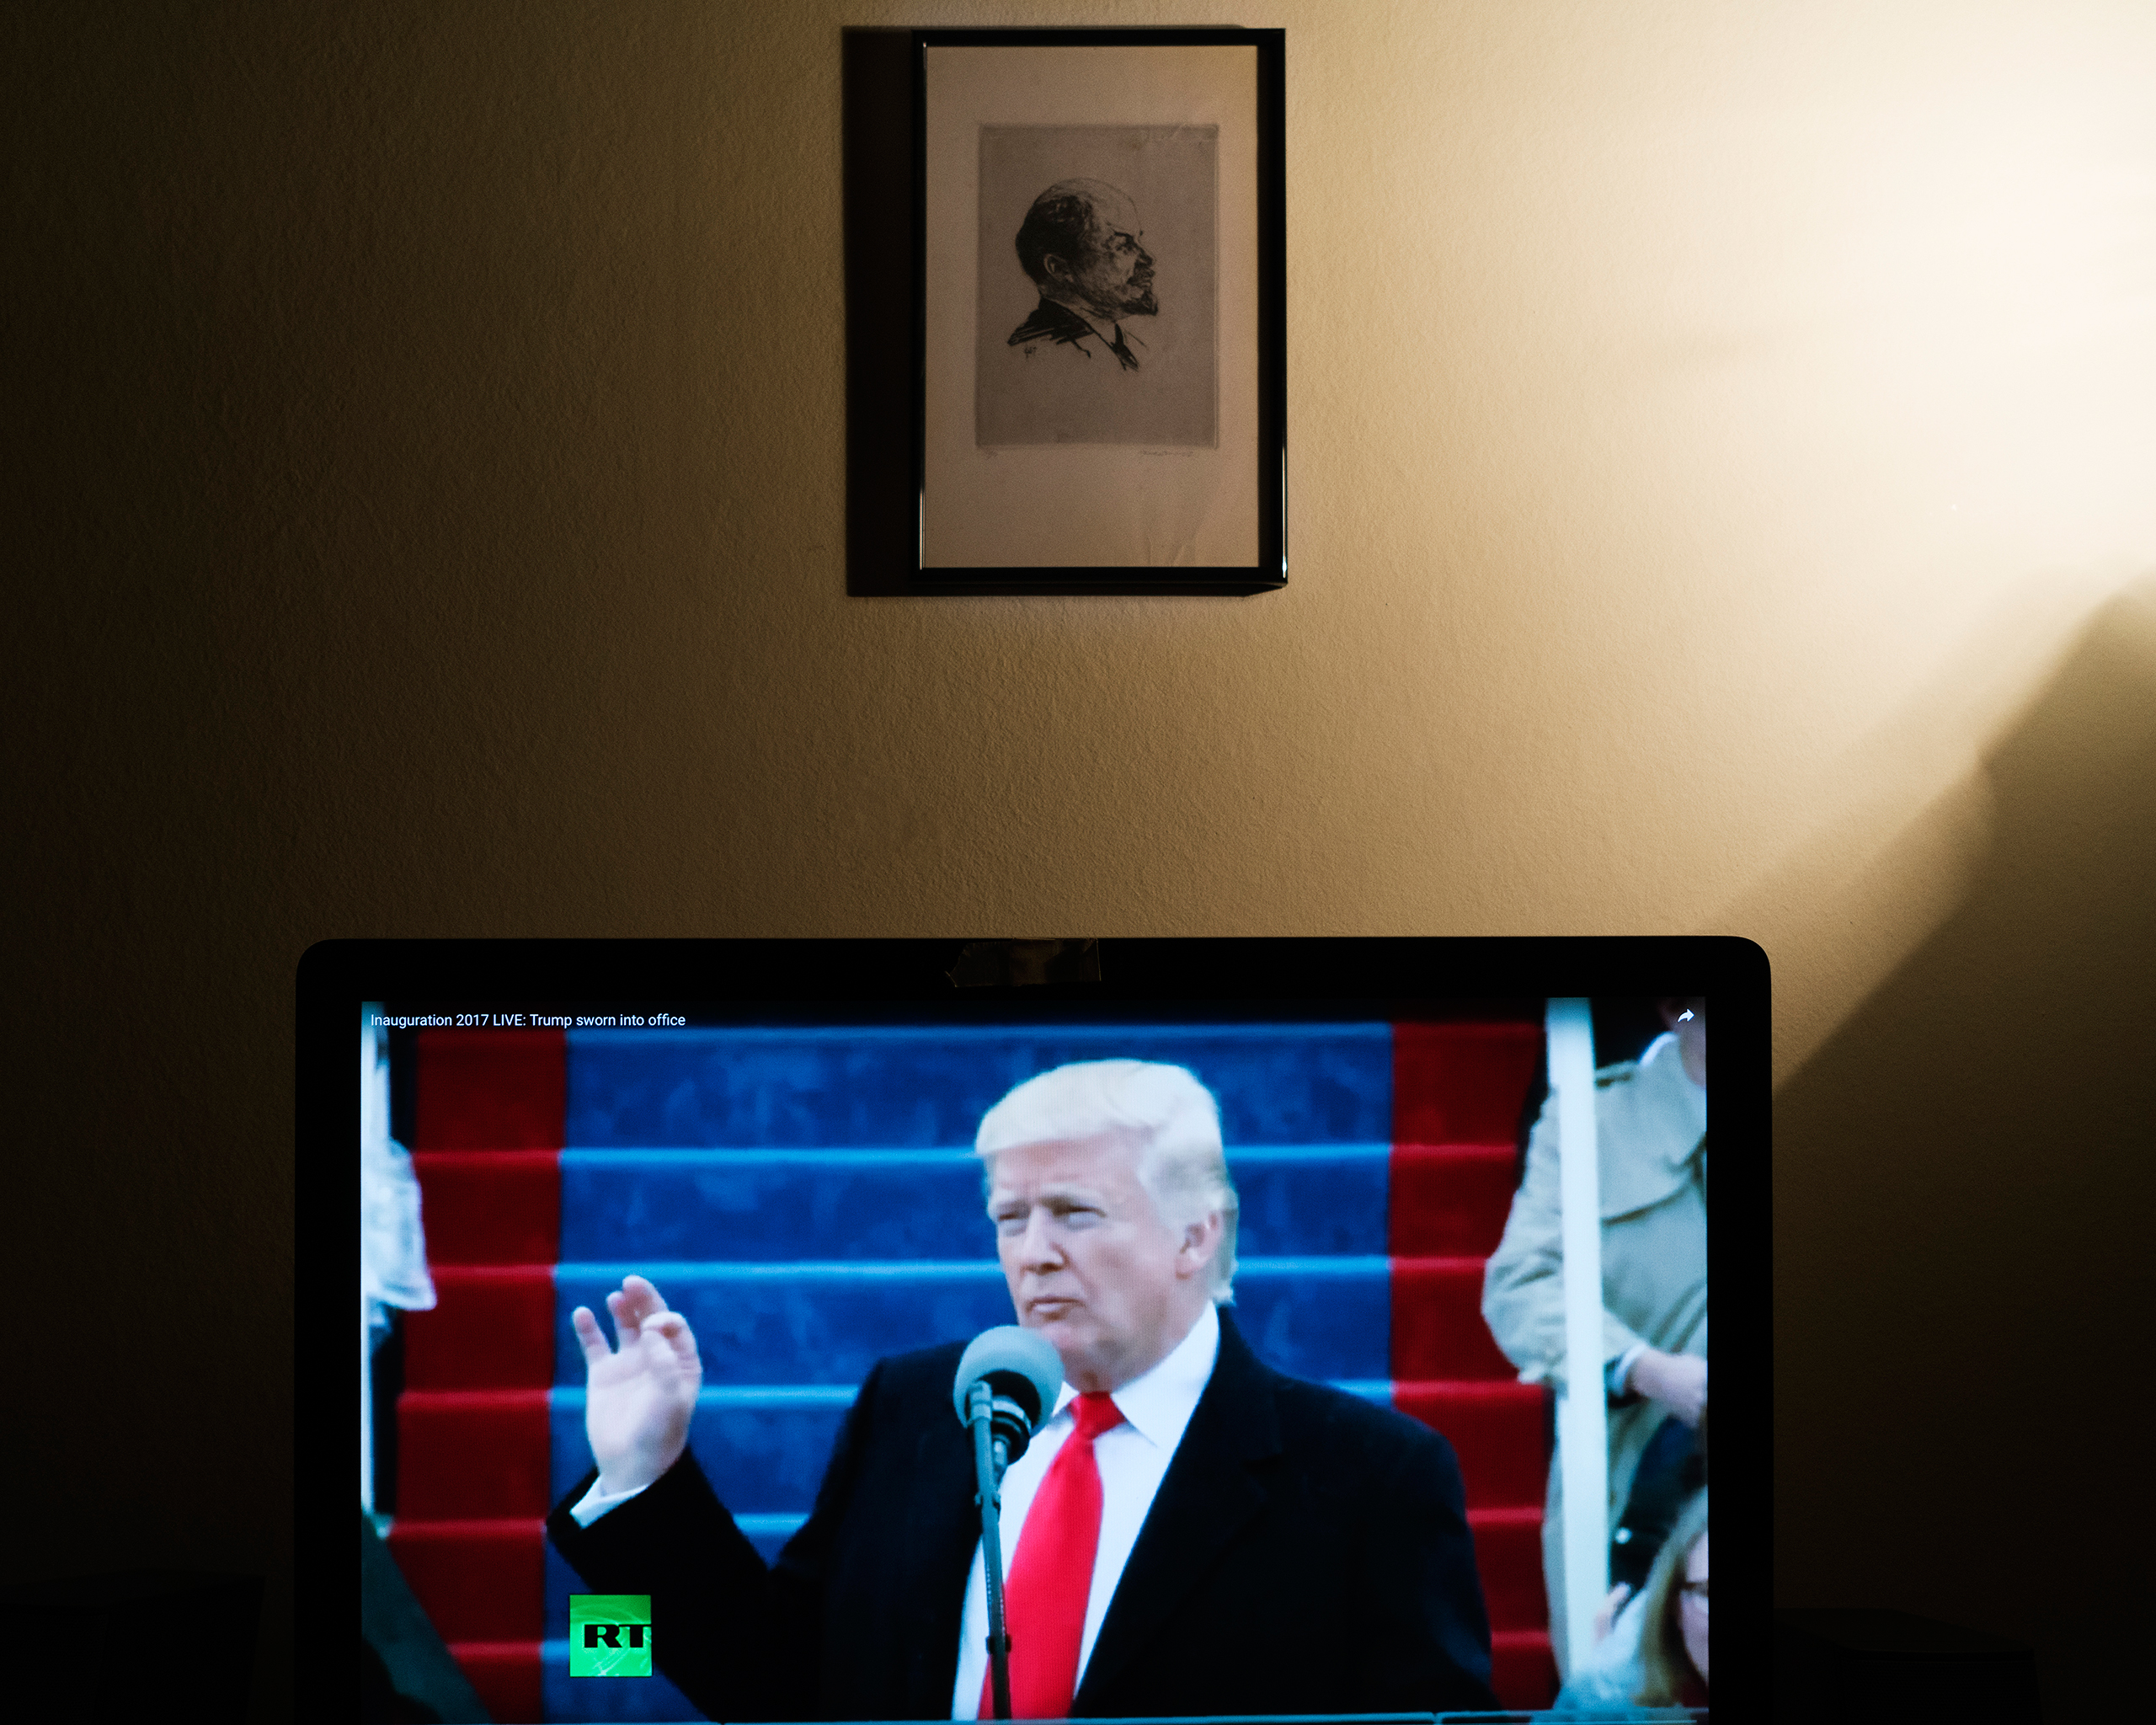 Donald Trump delivers his first address as the 45th American president in a broadcast carried by Russian state television network RT on Jan. 20, 2017. A portrait of Vladimir Lenin hangs on the wall of the photographer's home.